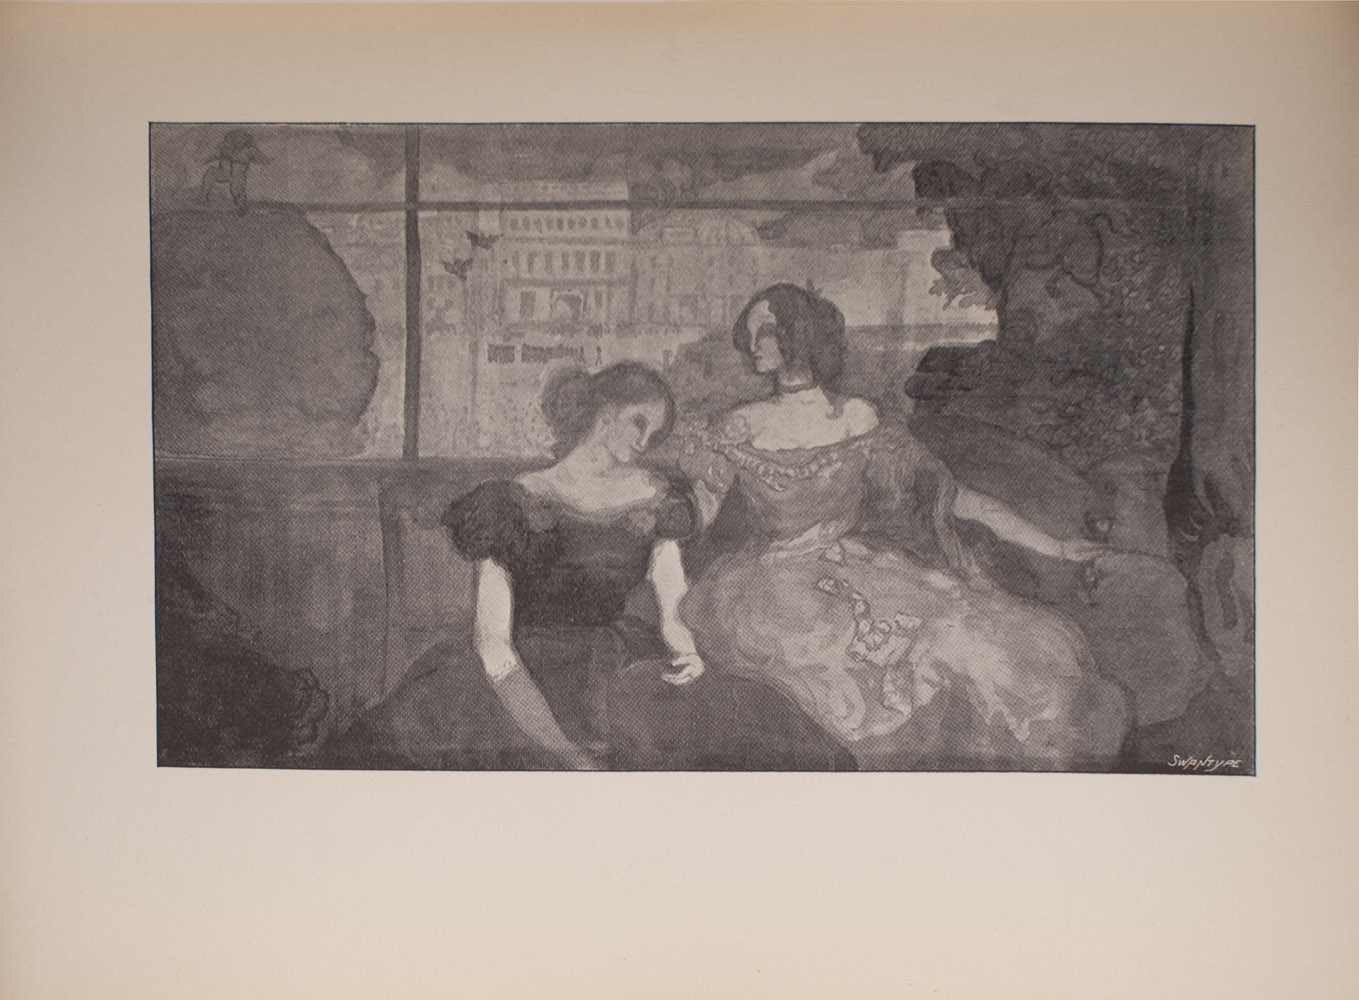 The image is of two women who are both seated The woman on the left sits lower than the woman on the right The woman on the left is wearing a dark evening gown while the woman on the right is wearing a lighter gown The woman on the right is wearing a choker around her neck and is looking to the viewer s left The woman on the left is looking down and to the viewer s right In the background of the image there are buildings There are lines that cut through the image both vertically and horizontally which may indicate a window behind the seated women The horizontal line could also be a type of beam or tightrope In the left side of the background there is a figure gender unknown that appears to be balancing on the horizontal beam or rope above a tree The image is horizontally displayed